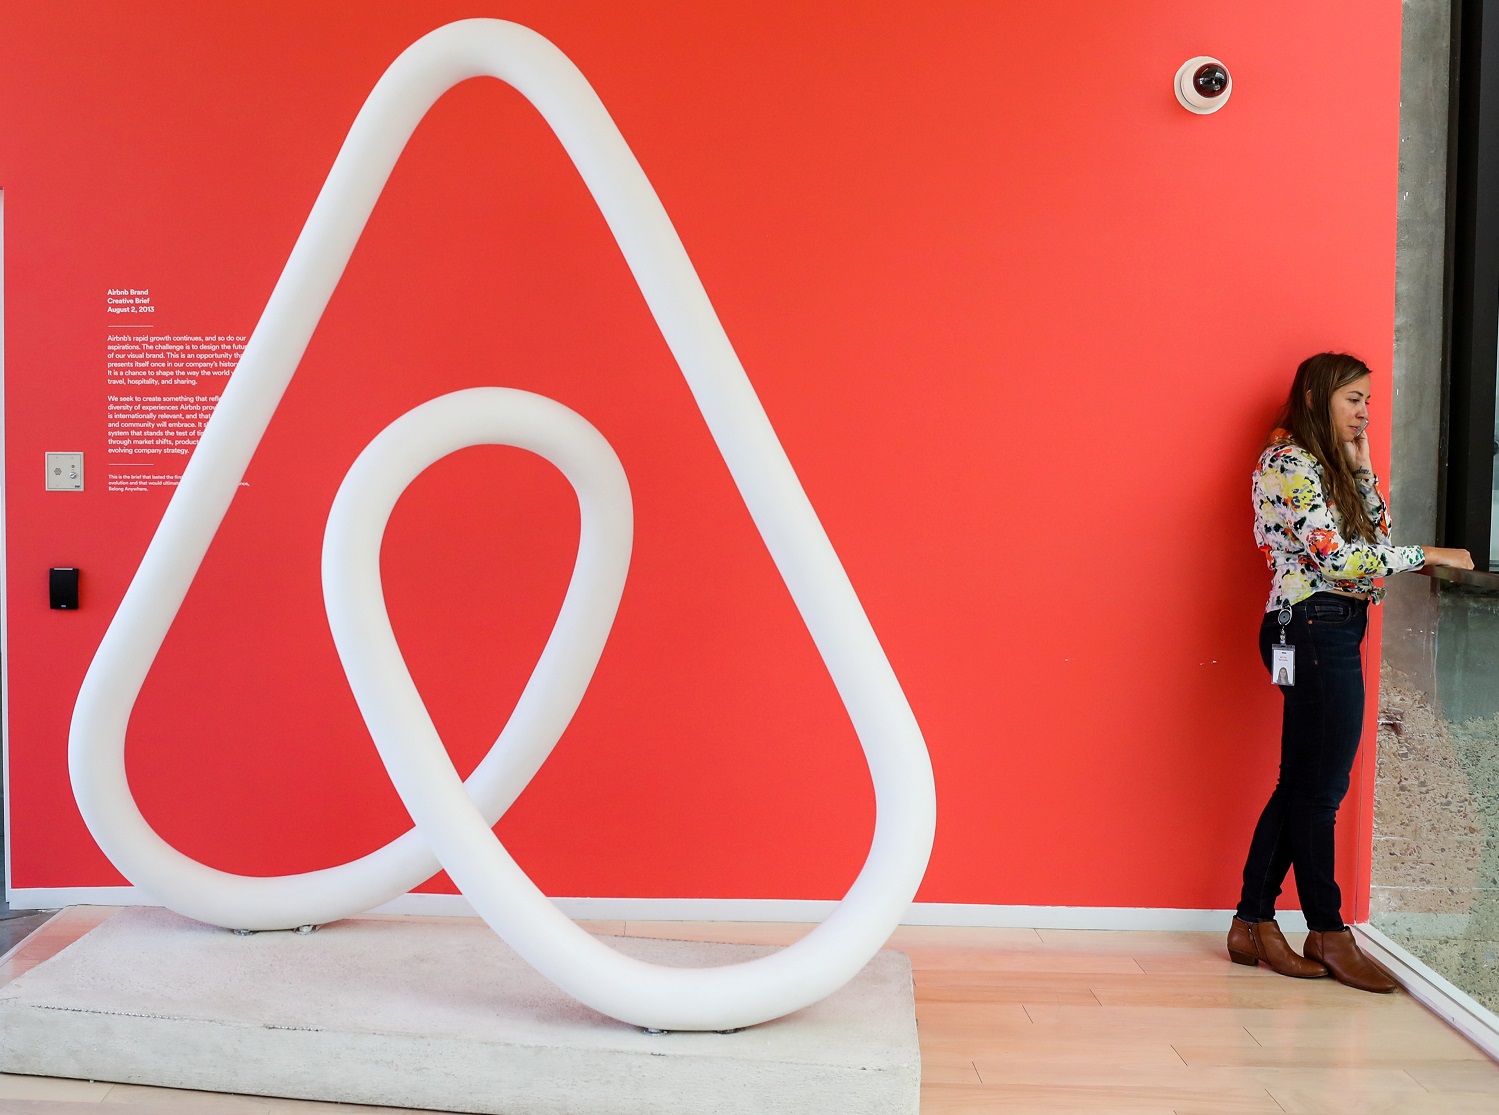 Airbnb is facing the prospect of an immense tax bill